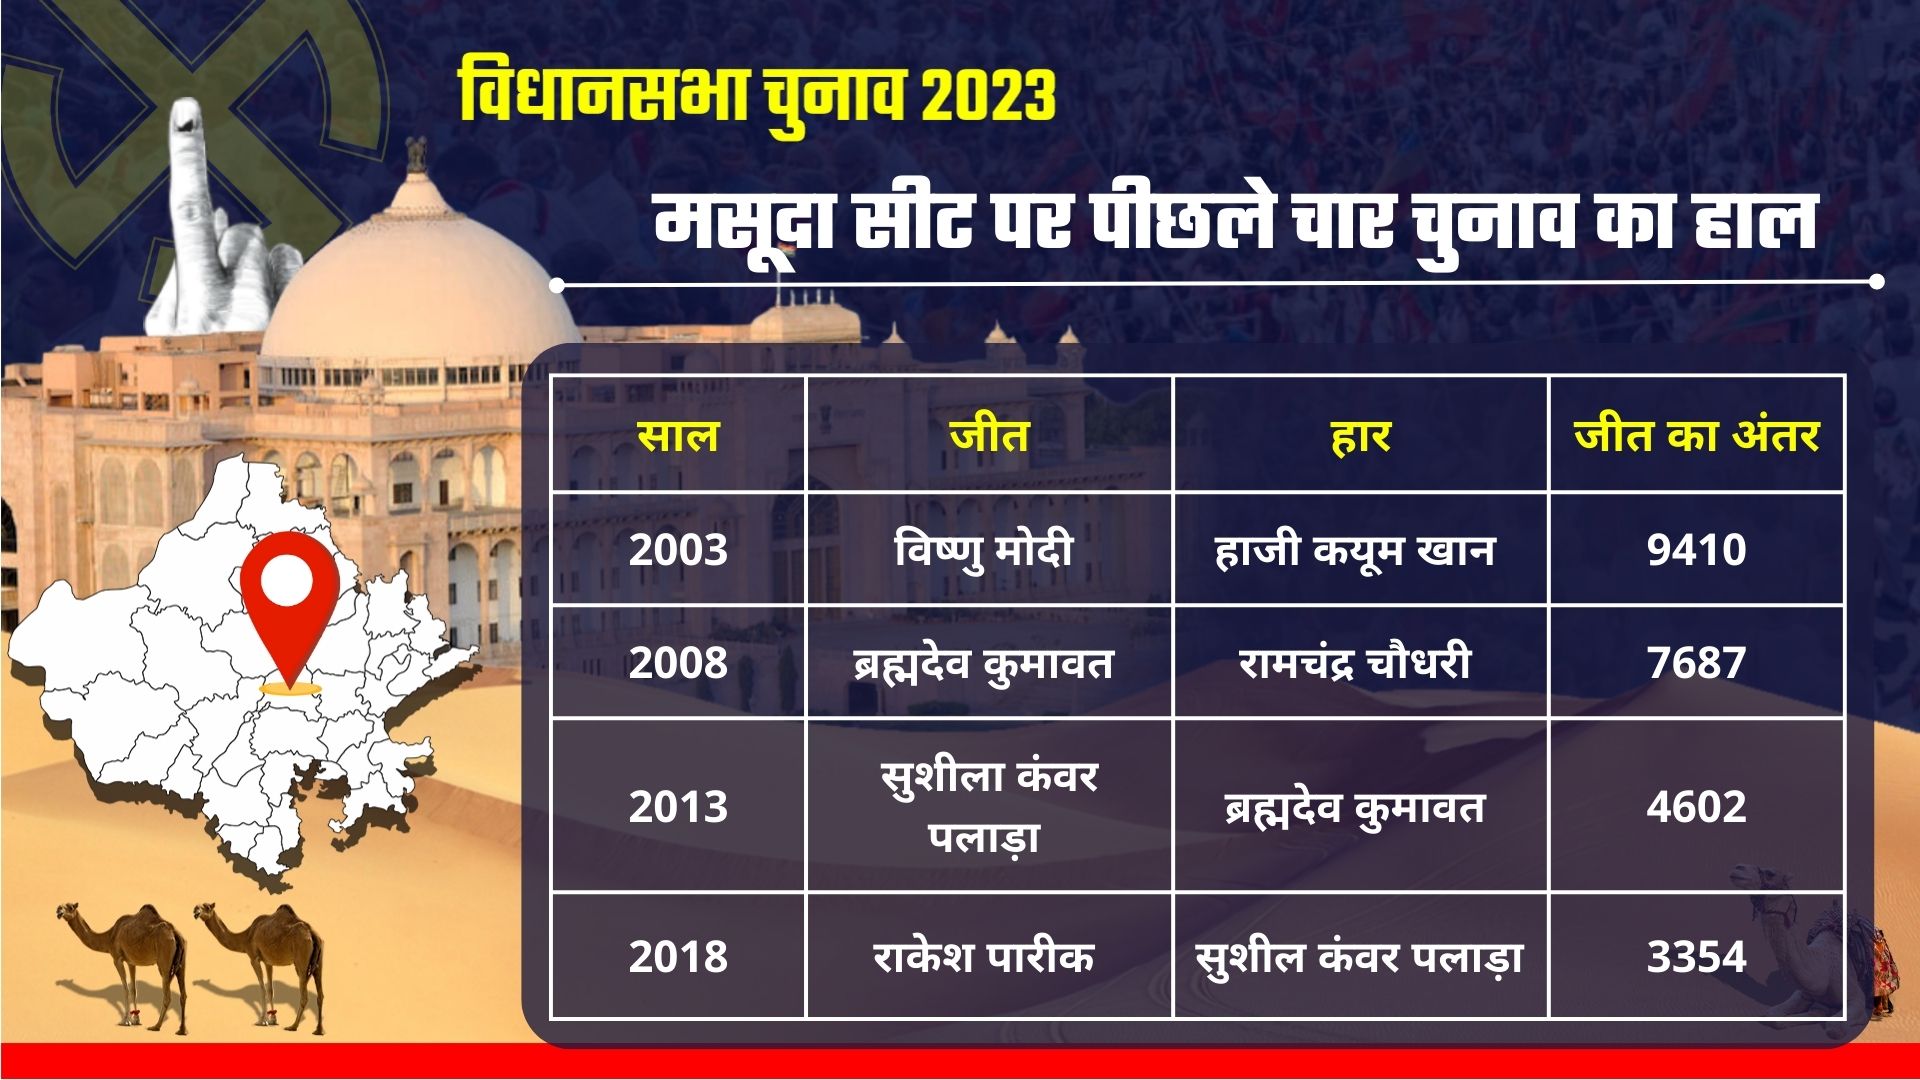 RAJASTHAN SEAT SCAN,  RAJASTHAN ASSEMBLY ELECTION 2023